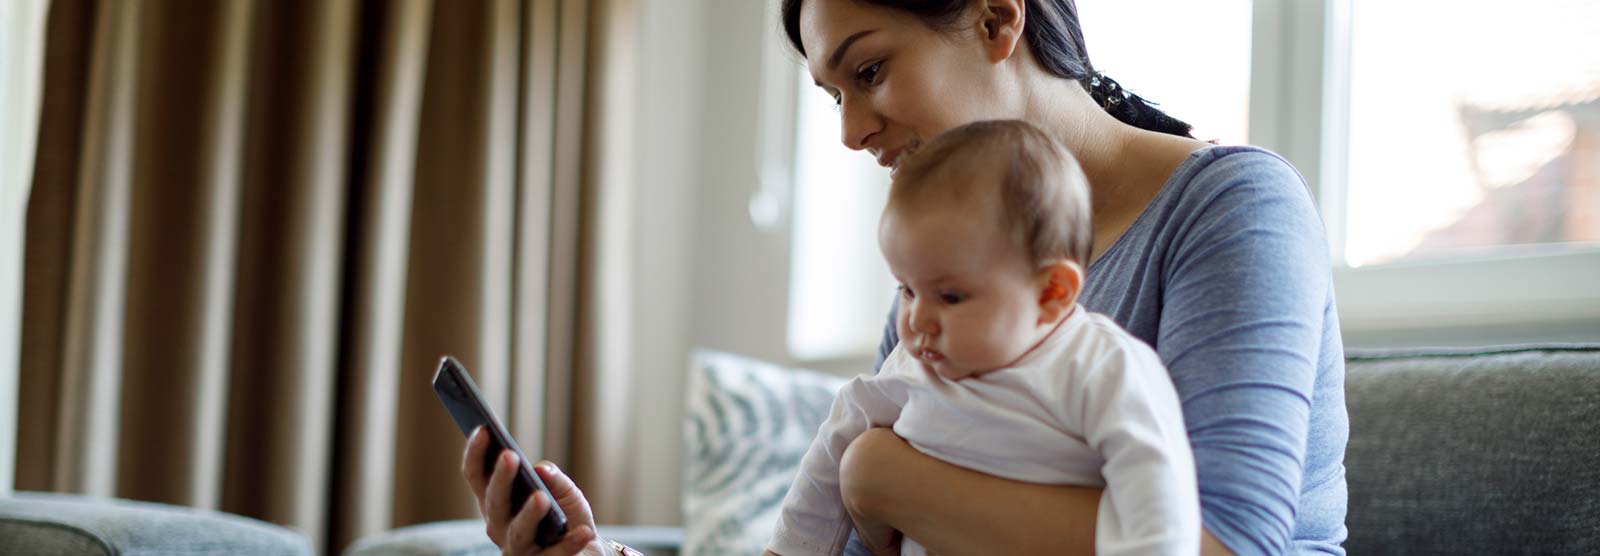 Mother using a smartphone while holding a baby